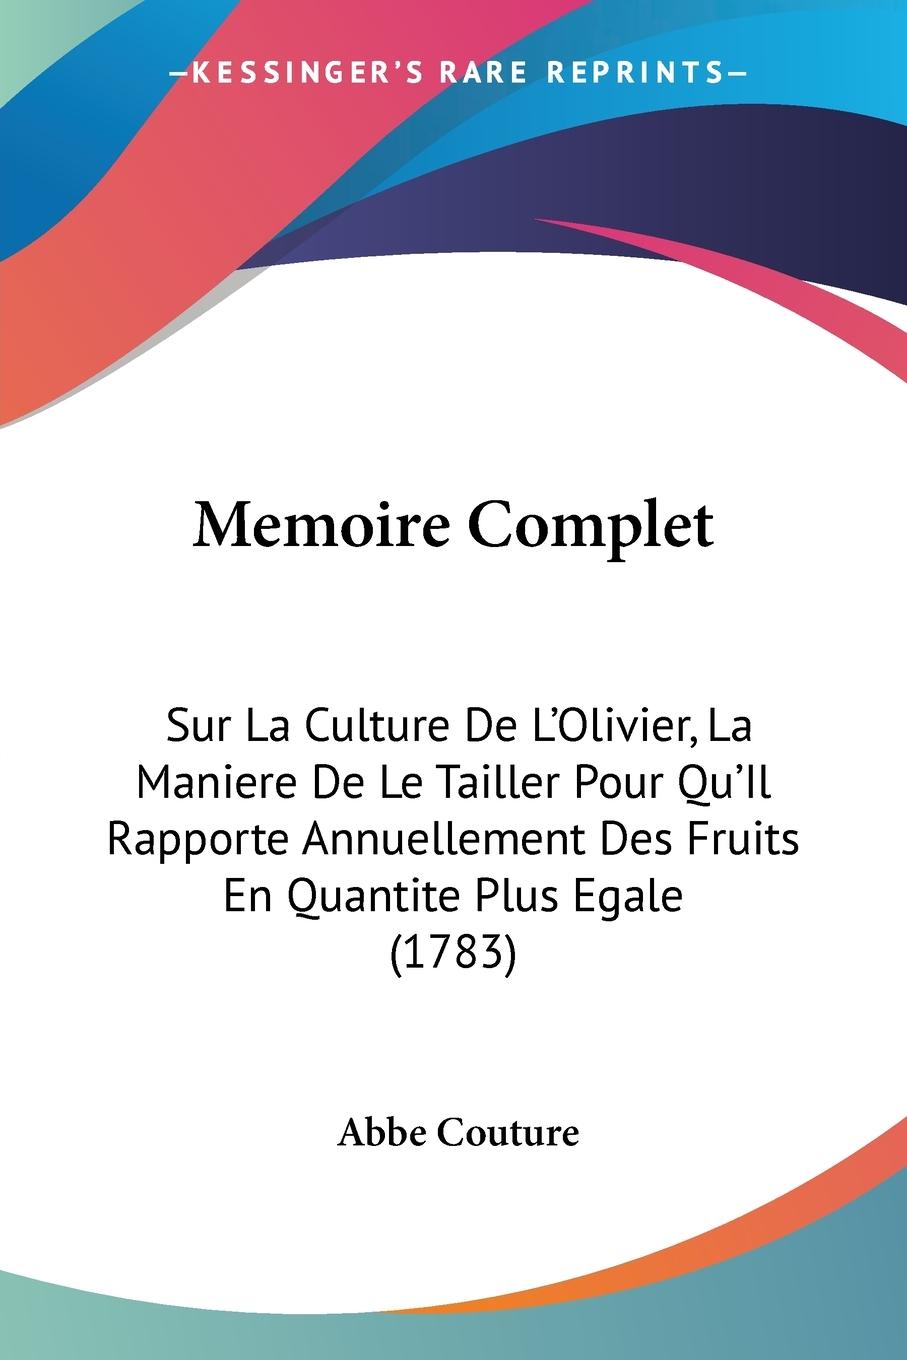 Memoire Complet - Couture, Abbe